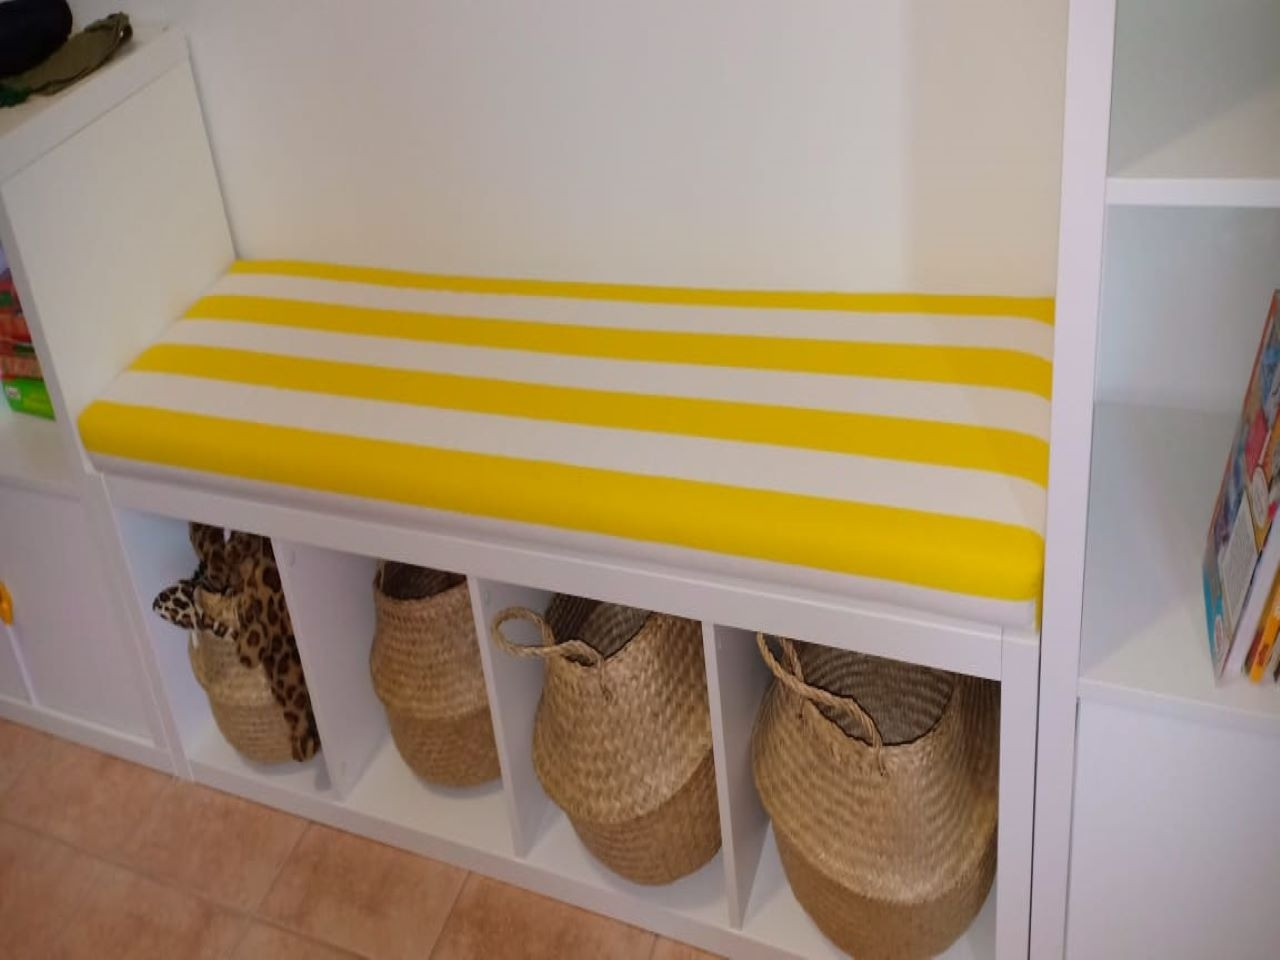 Cushion for Ikea table in striped yellow fabric